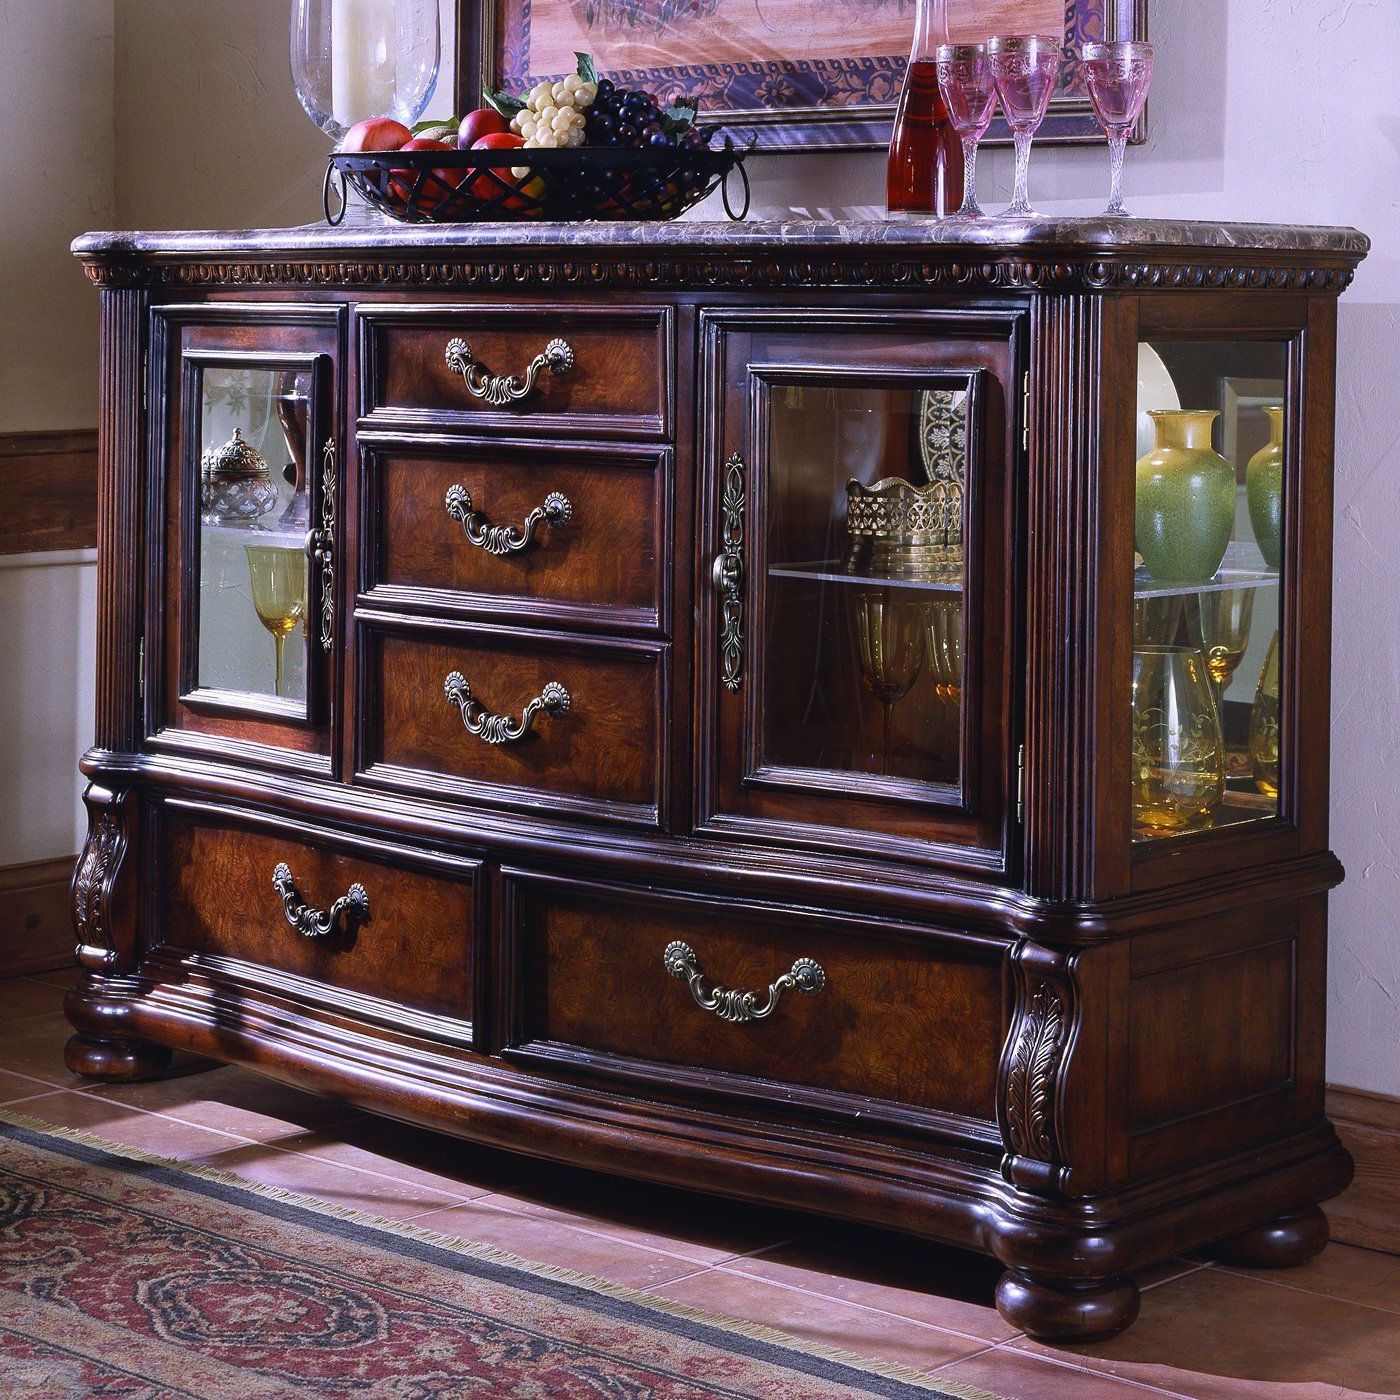 Samuel Lawrence 3530 146 San Marino Credenza Sideboard Pertaining To Weinberger Sideboards (View 2 of 20)